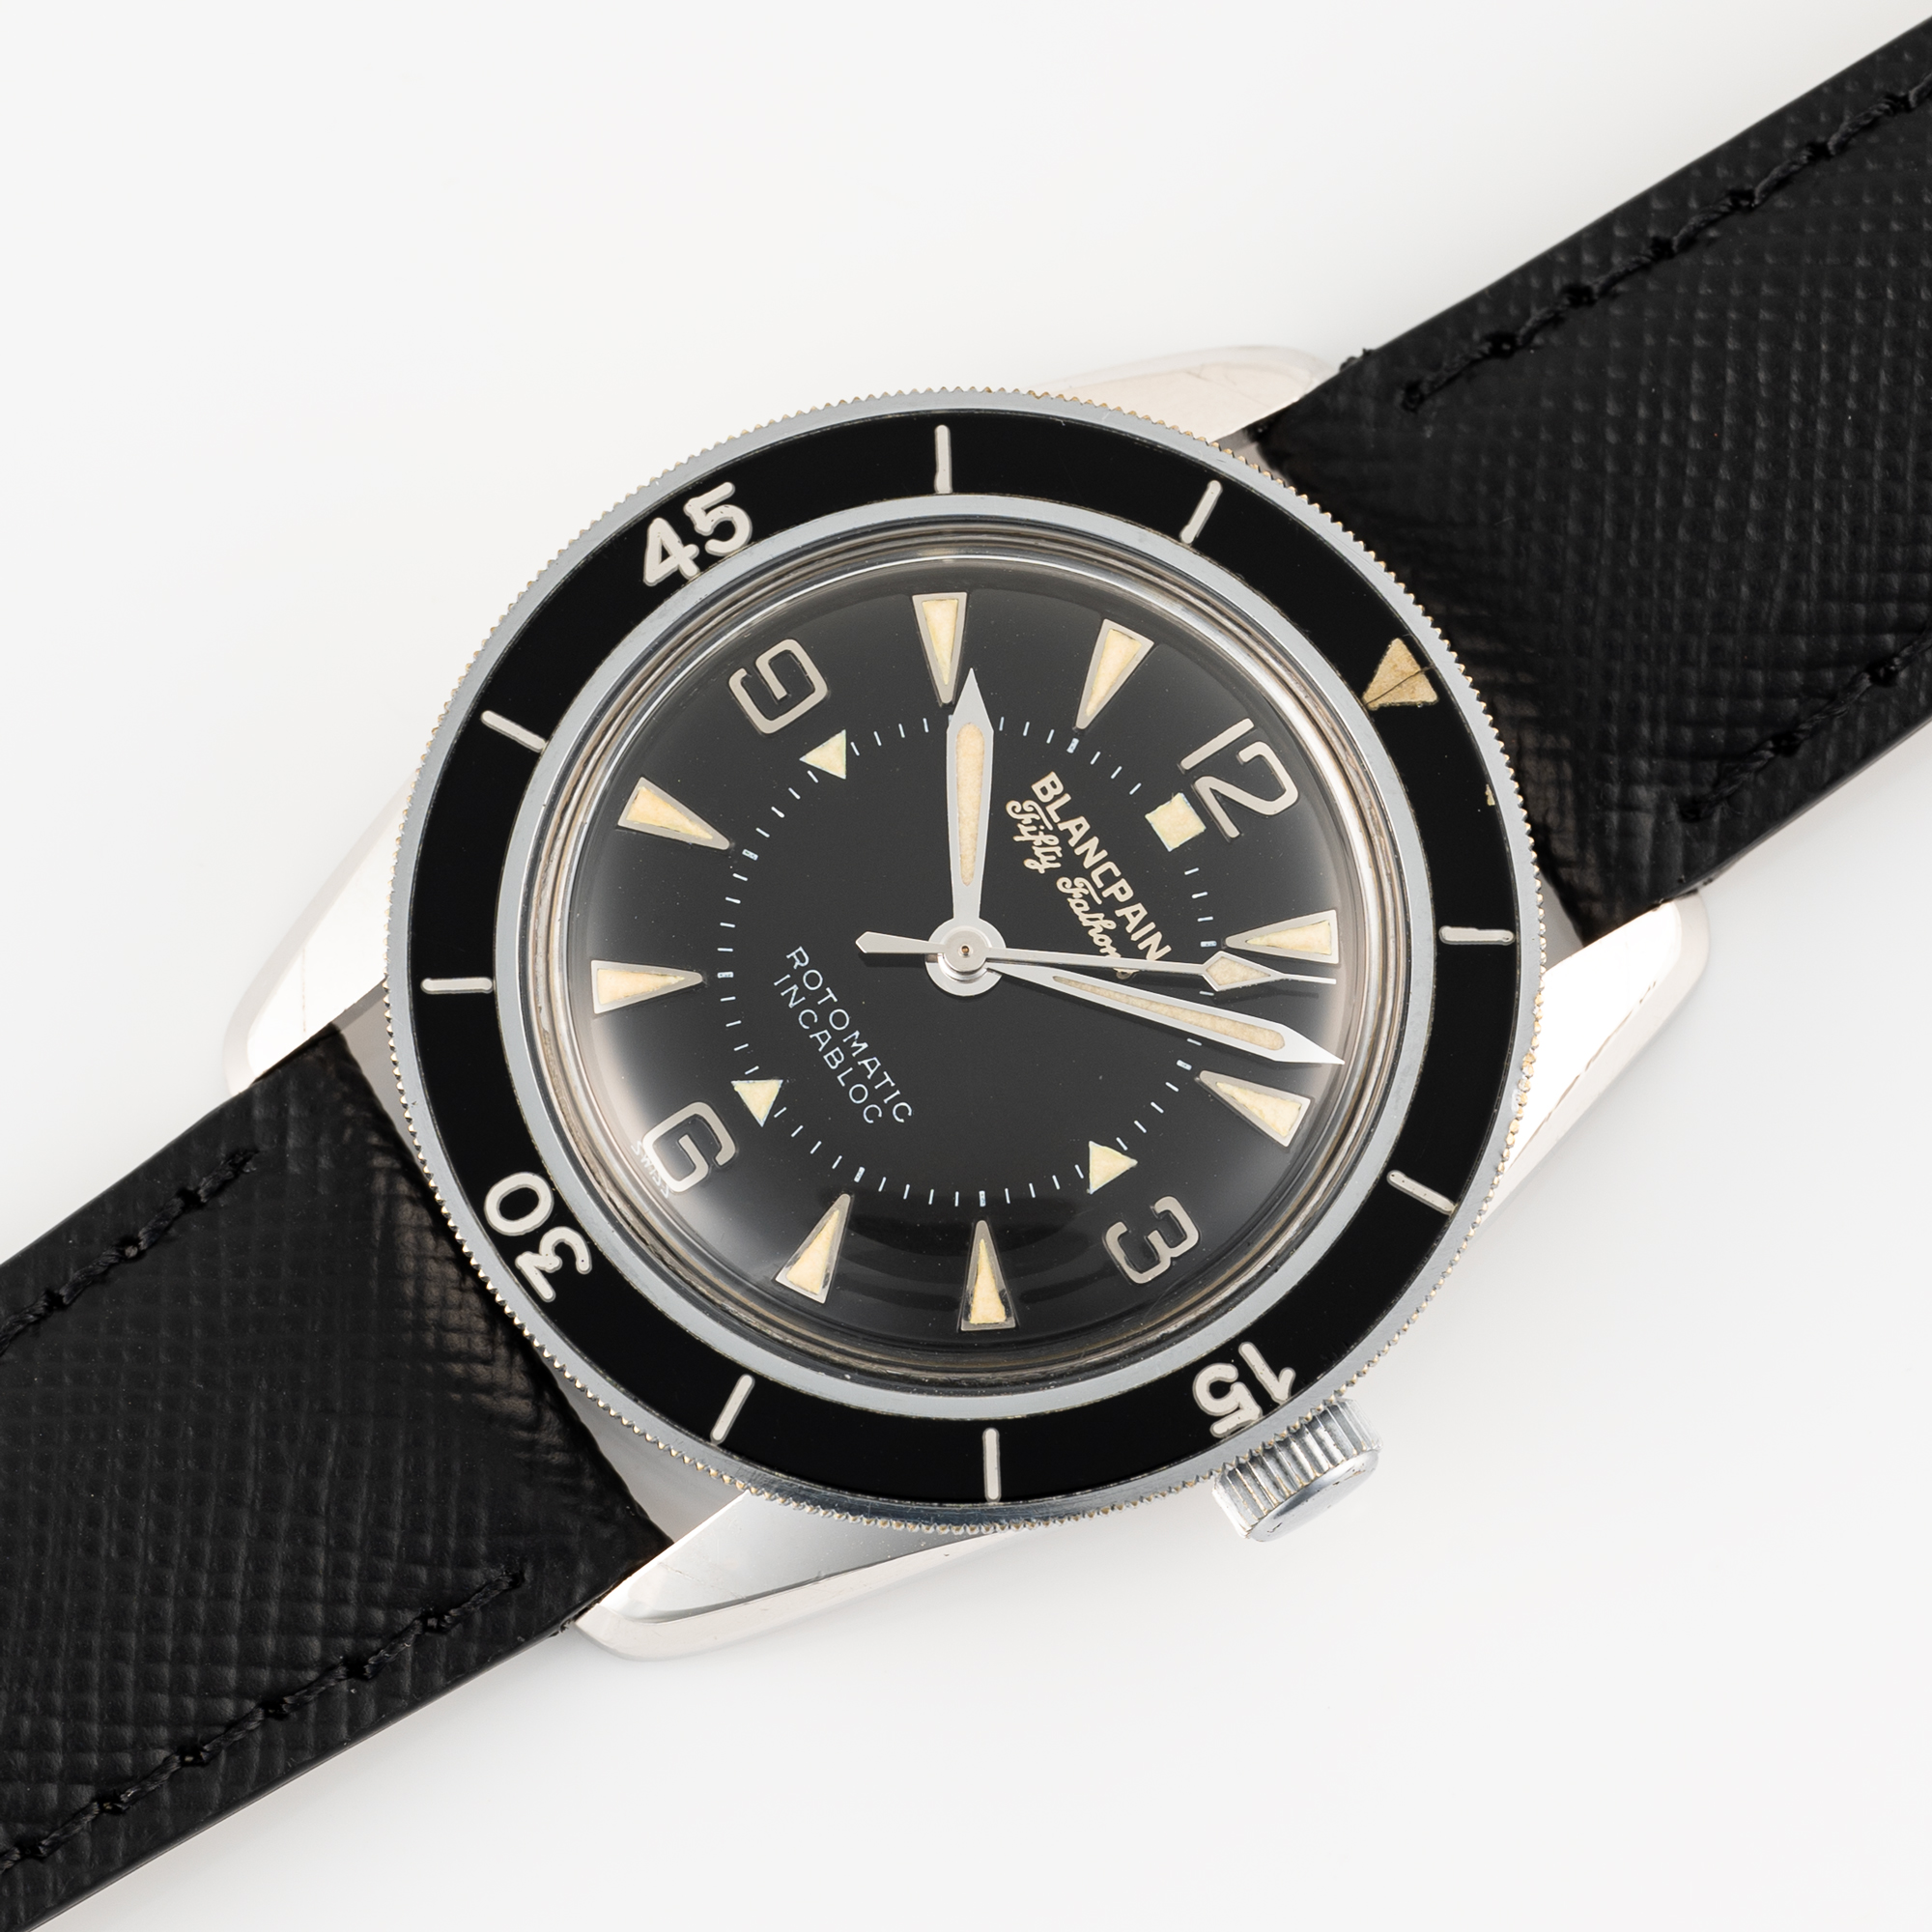 A RARE GENTLEMAN'S SIZE BLANCPAIN FIFTY FATHOMS ROTOMATIC DIVERS WRIST WATCH CIRCA 1950s, THIS WATCH - Image 4 of 8